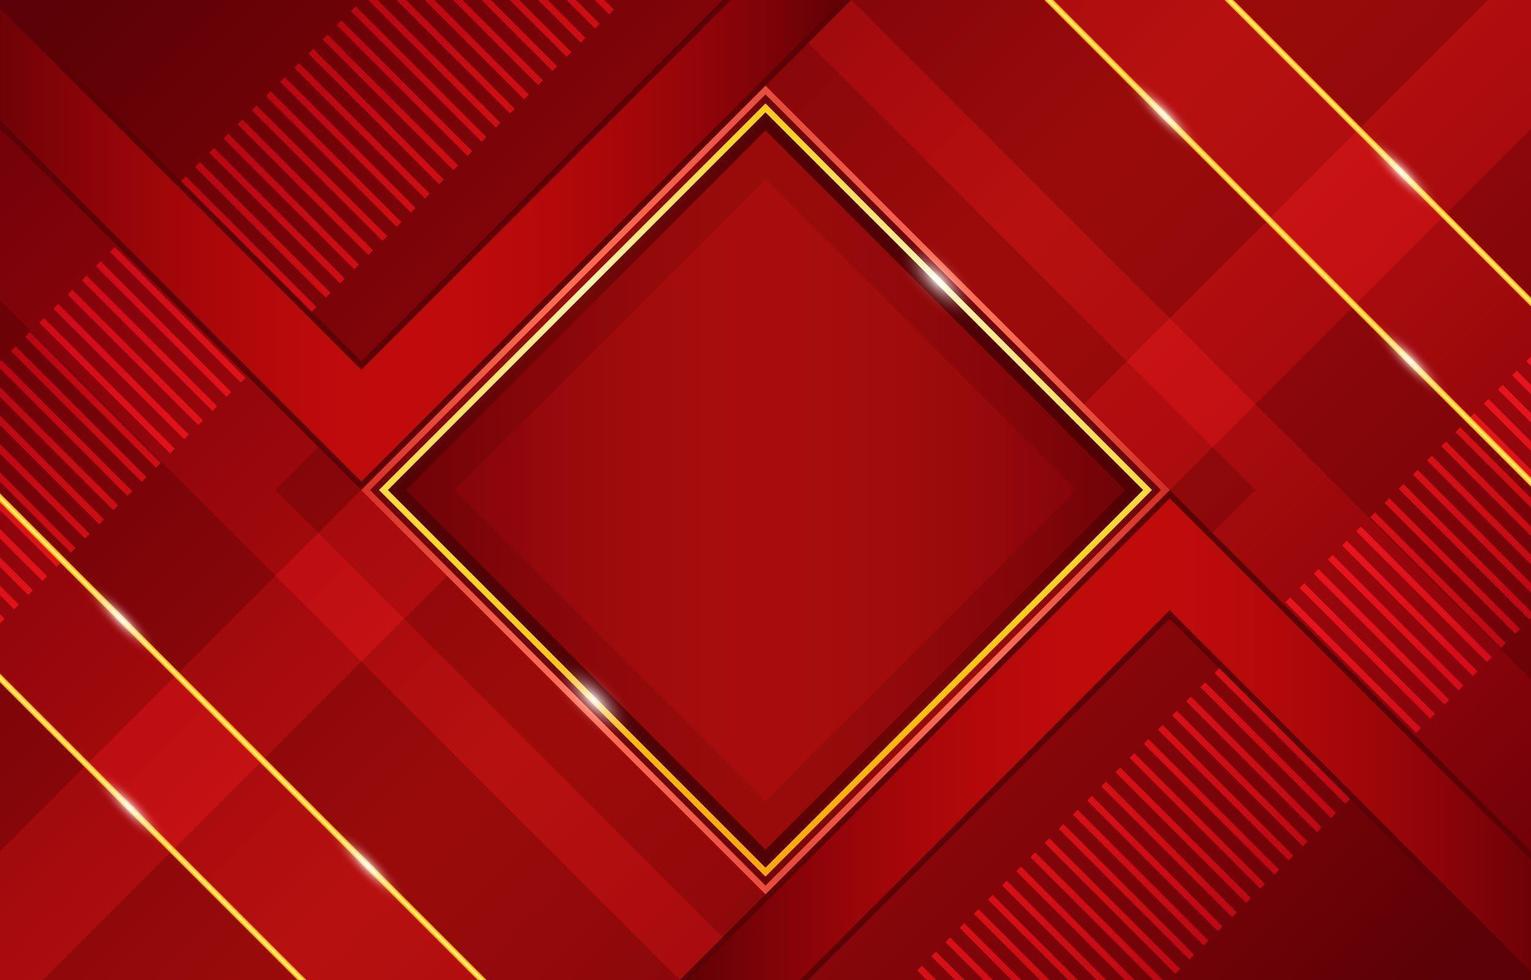 Geometric Red with Gold Highlights and Diagonal Shape Composition vector